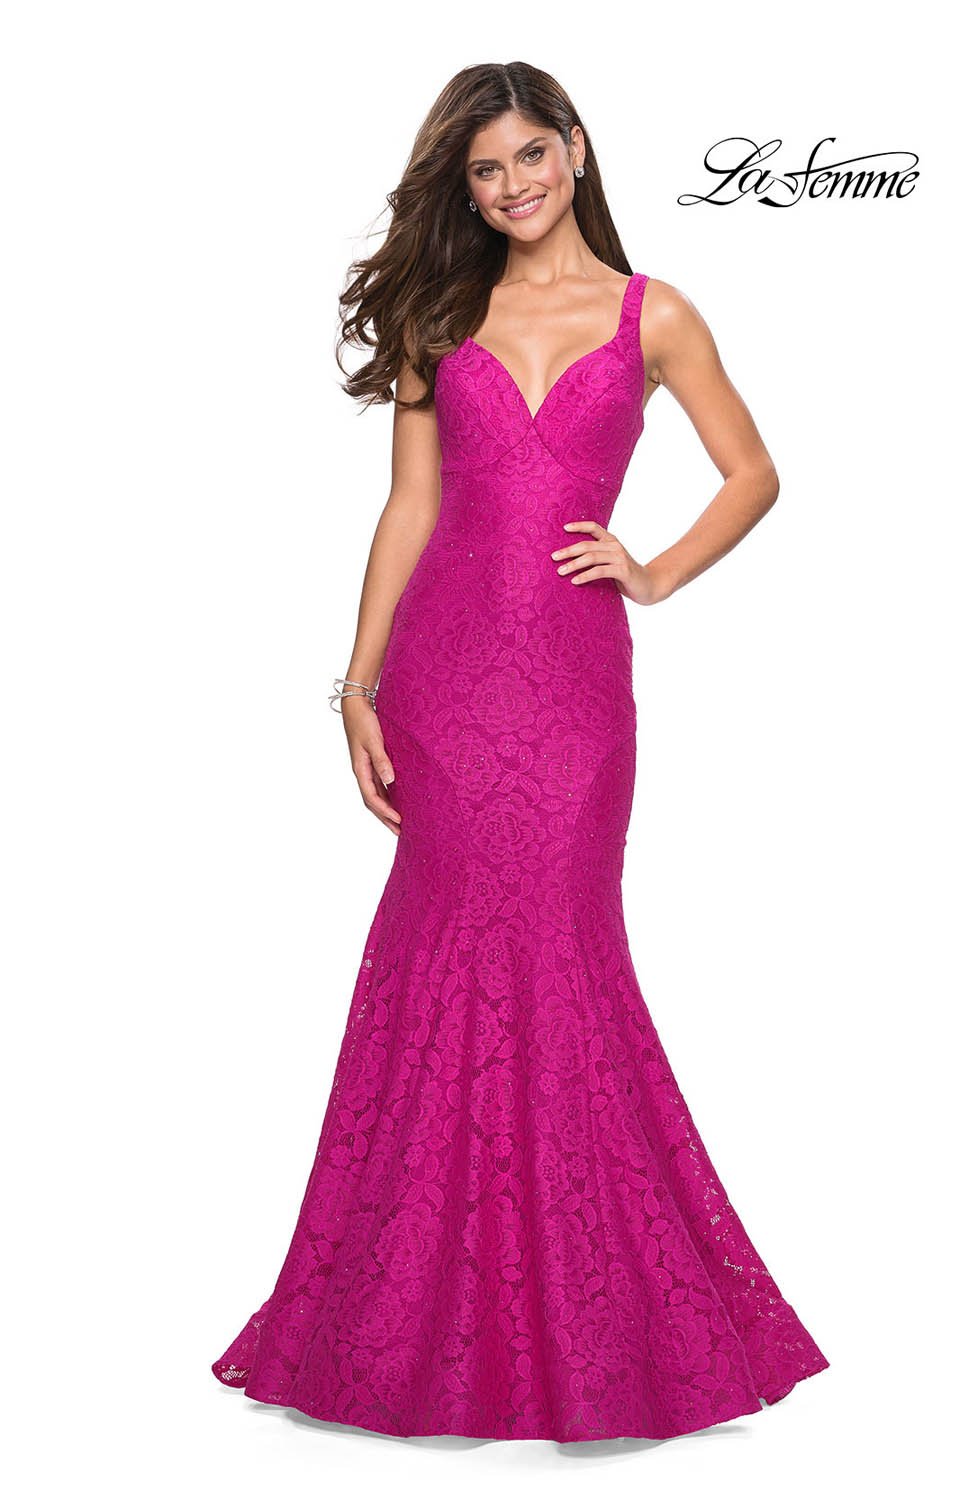 La Femme 27623 dress images in these colors: Cloud Blue, Hot Pink, White, Yellow.